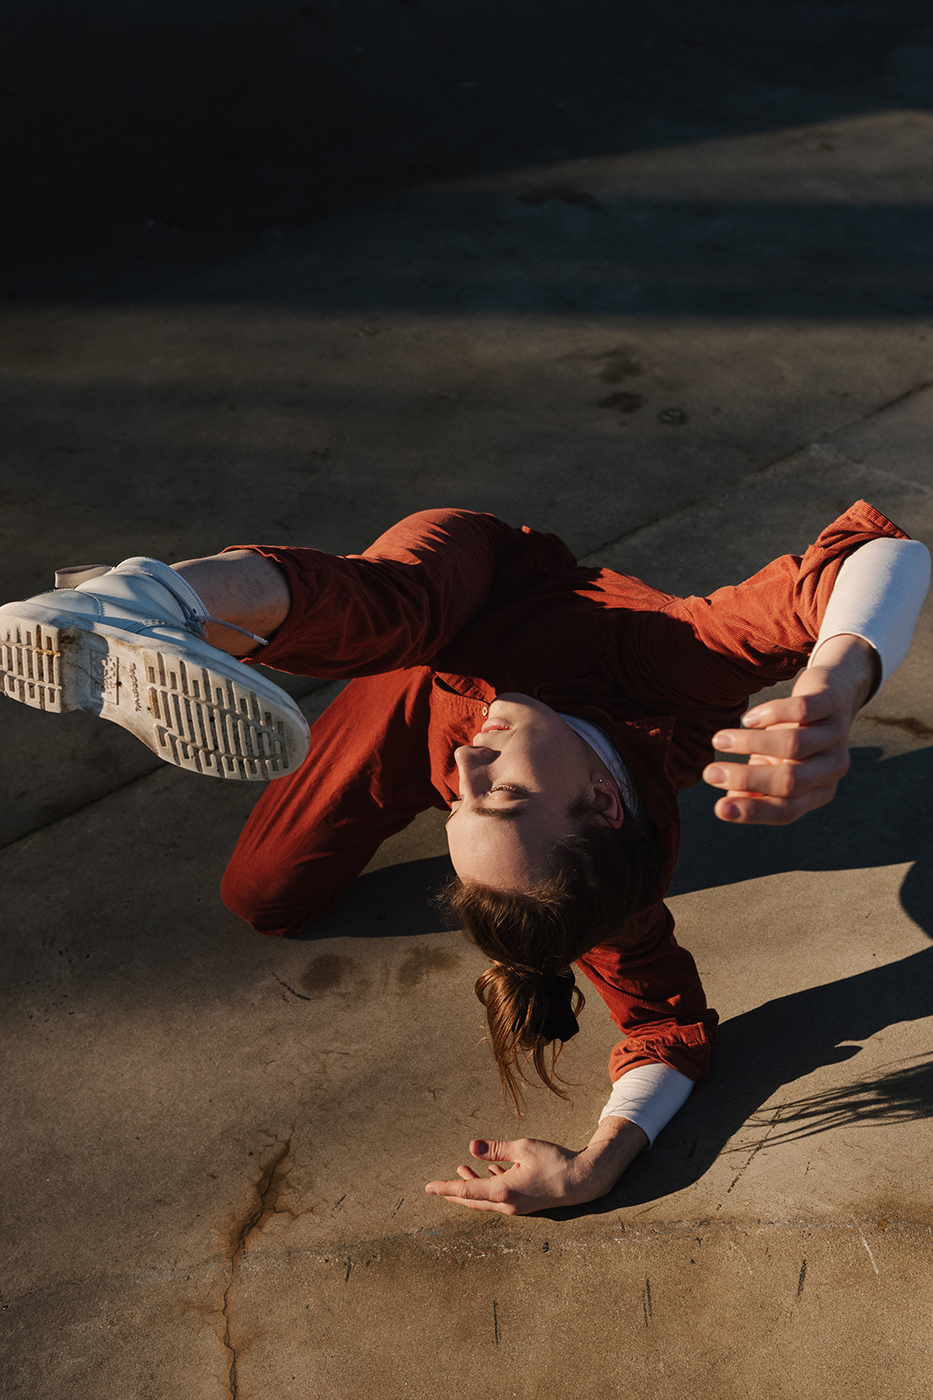 A person wearing a red jumpsuit is dancing on the pavement in the sunlight.